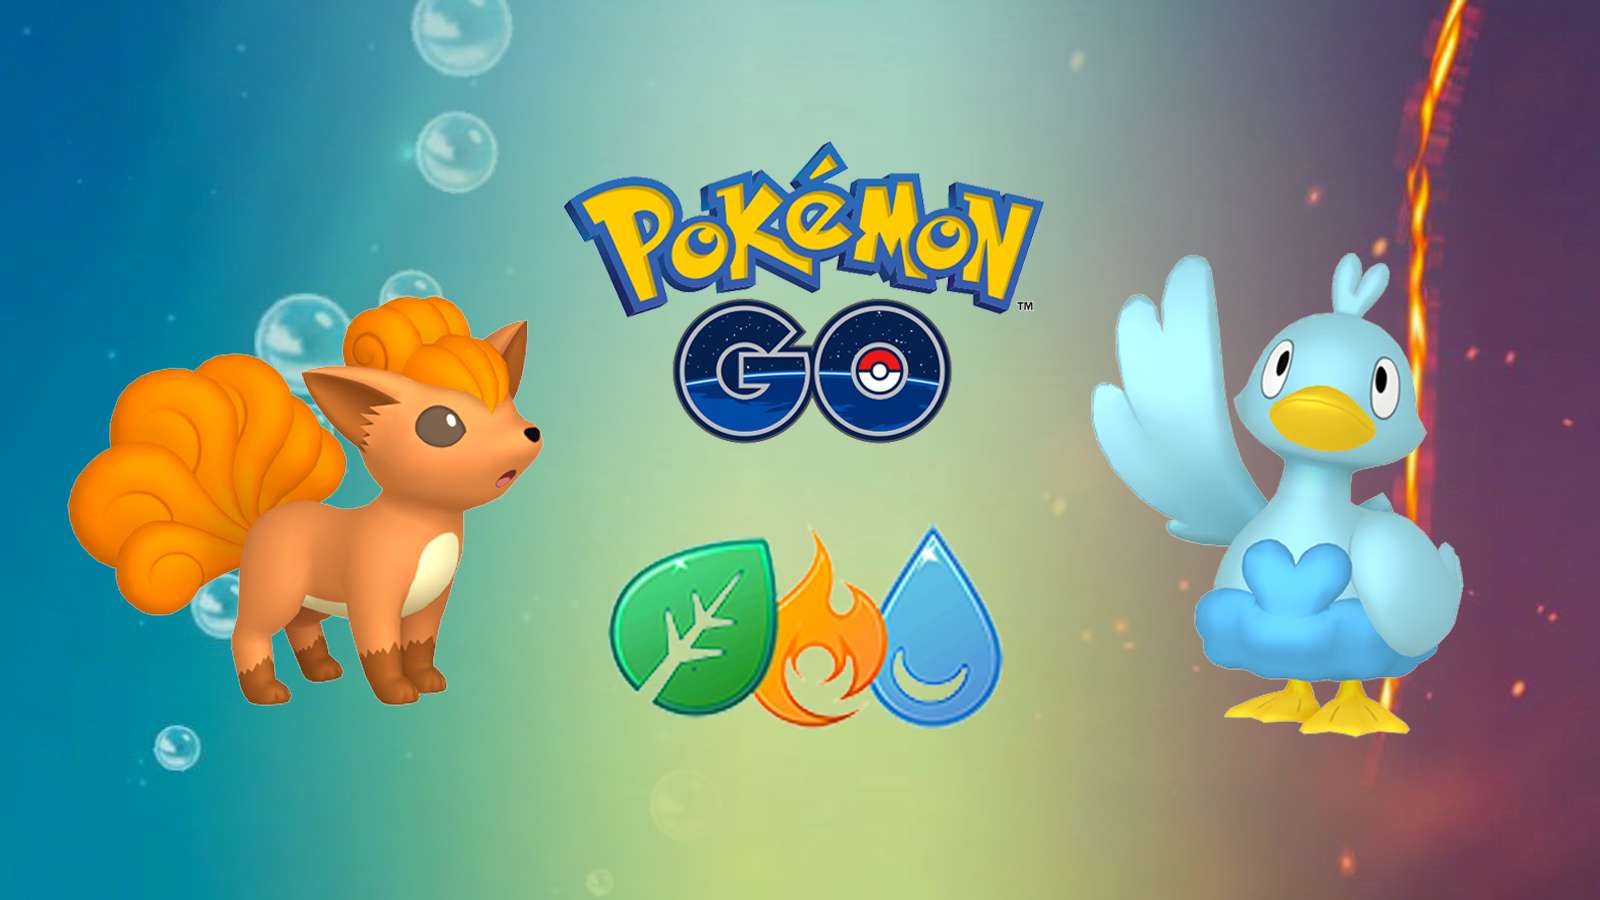 Vulpix and Ducklett appearing in the Pokemon Go Element Cup best team